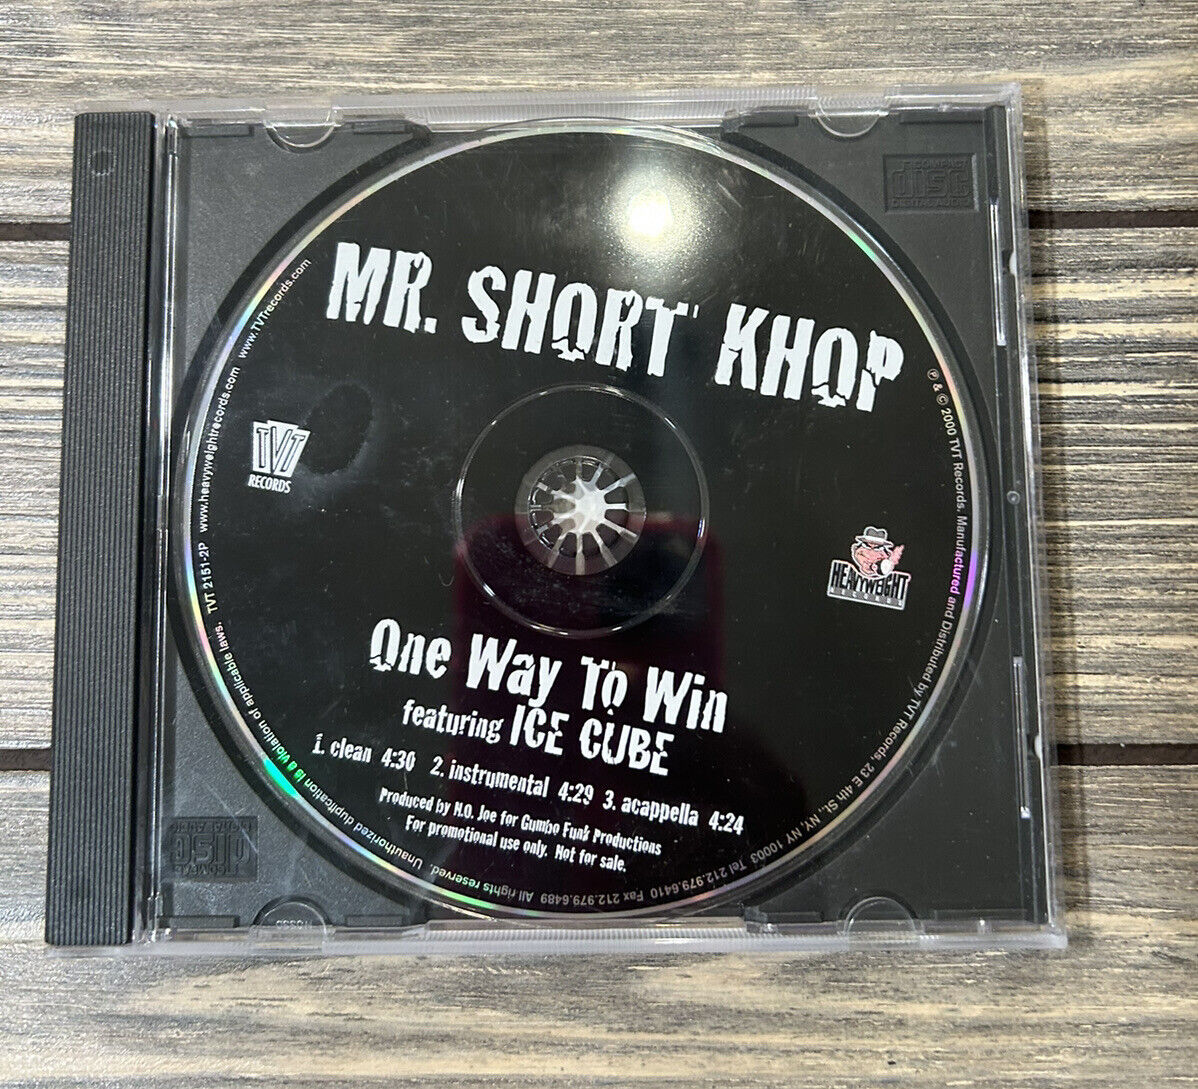 Vintage 2000 Mr Short Khop One Way To Win CD Featuring Ice Cube Promo